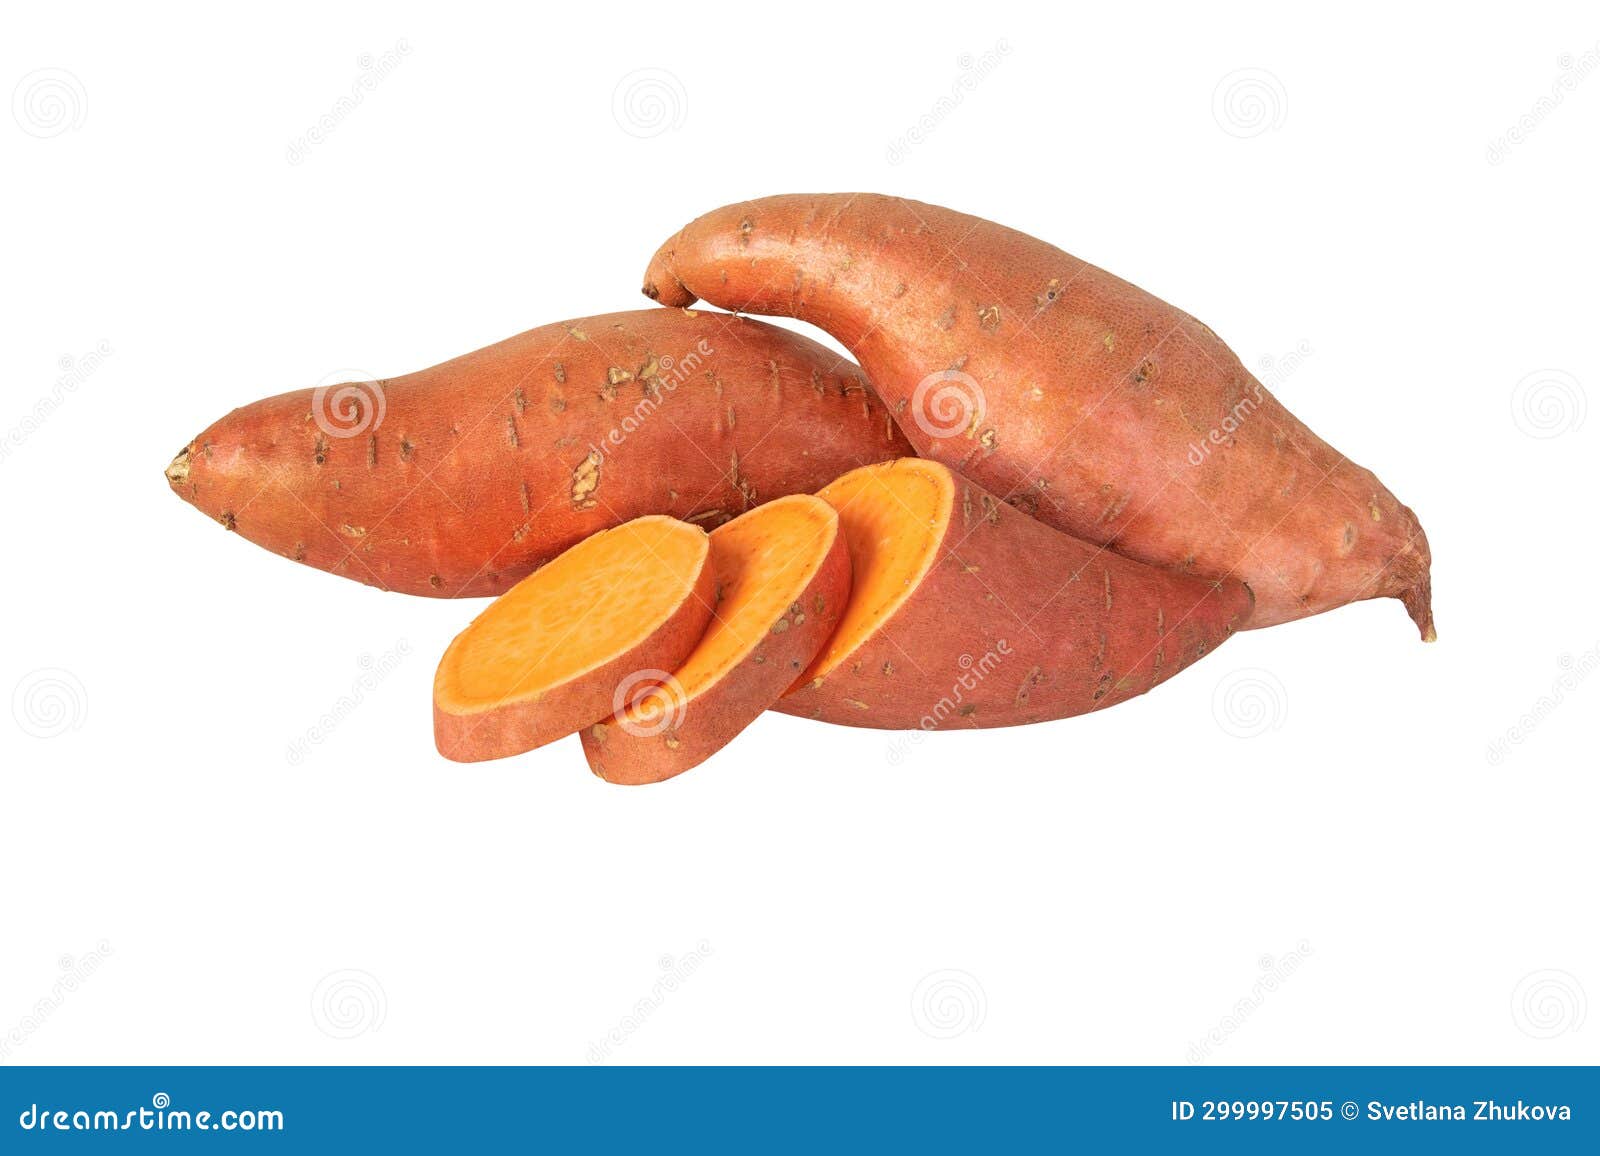 sweet potato or boniato two whole and one sliced tubes  on white. transparent png additional format